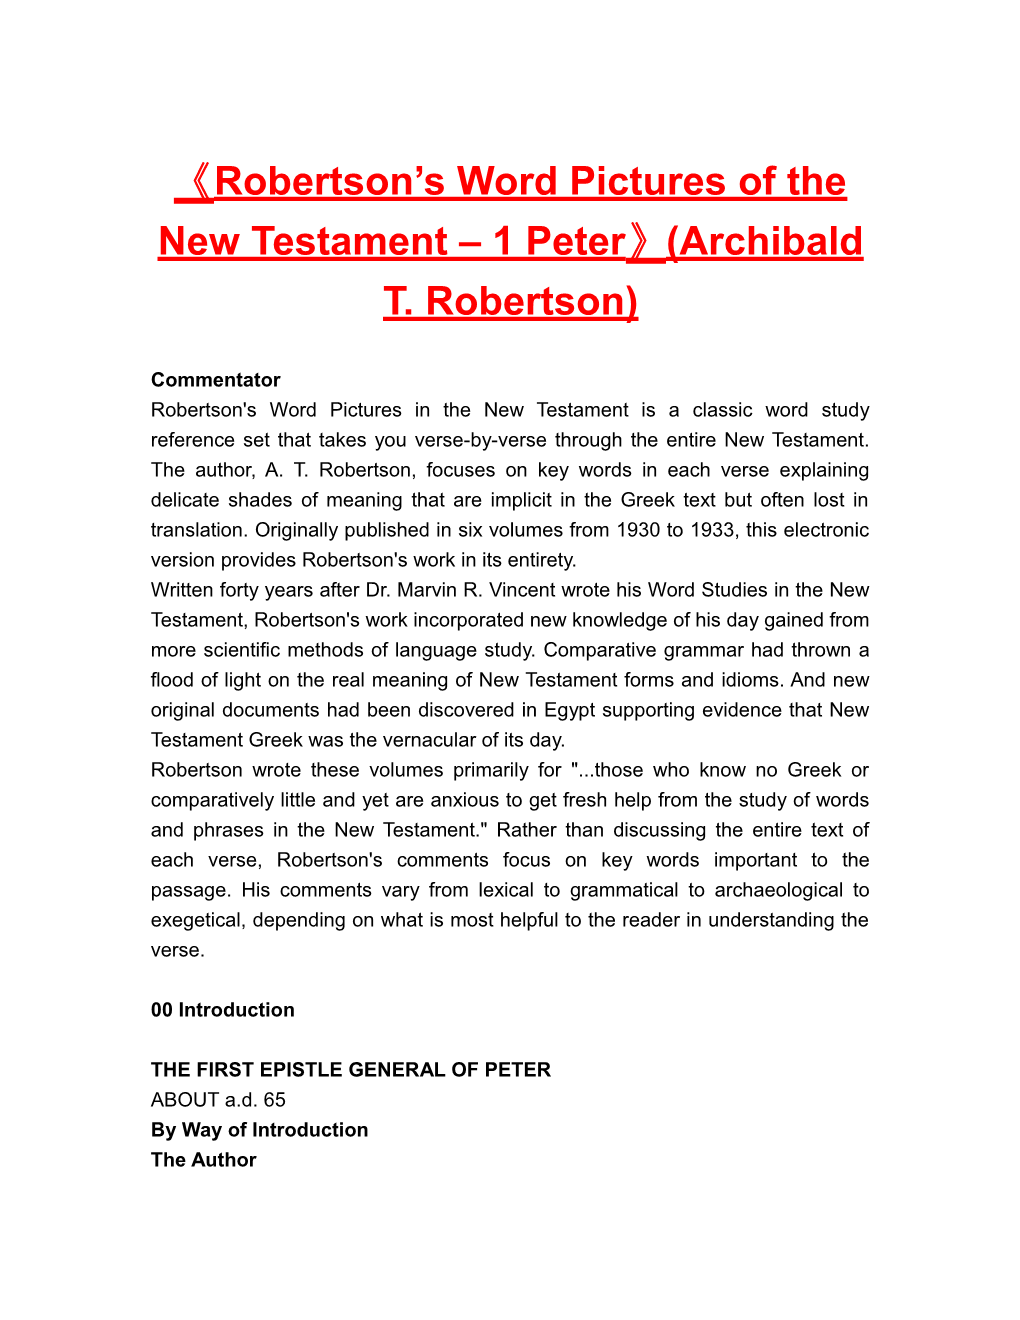 Robertson Sword Pictures of the New Testament 1 Peter (Archibald T. Robertson)